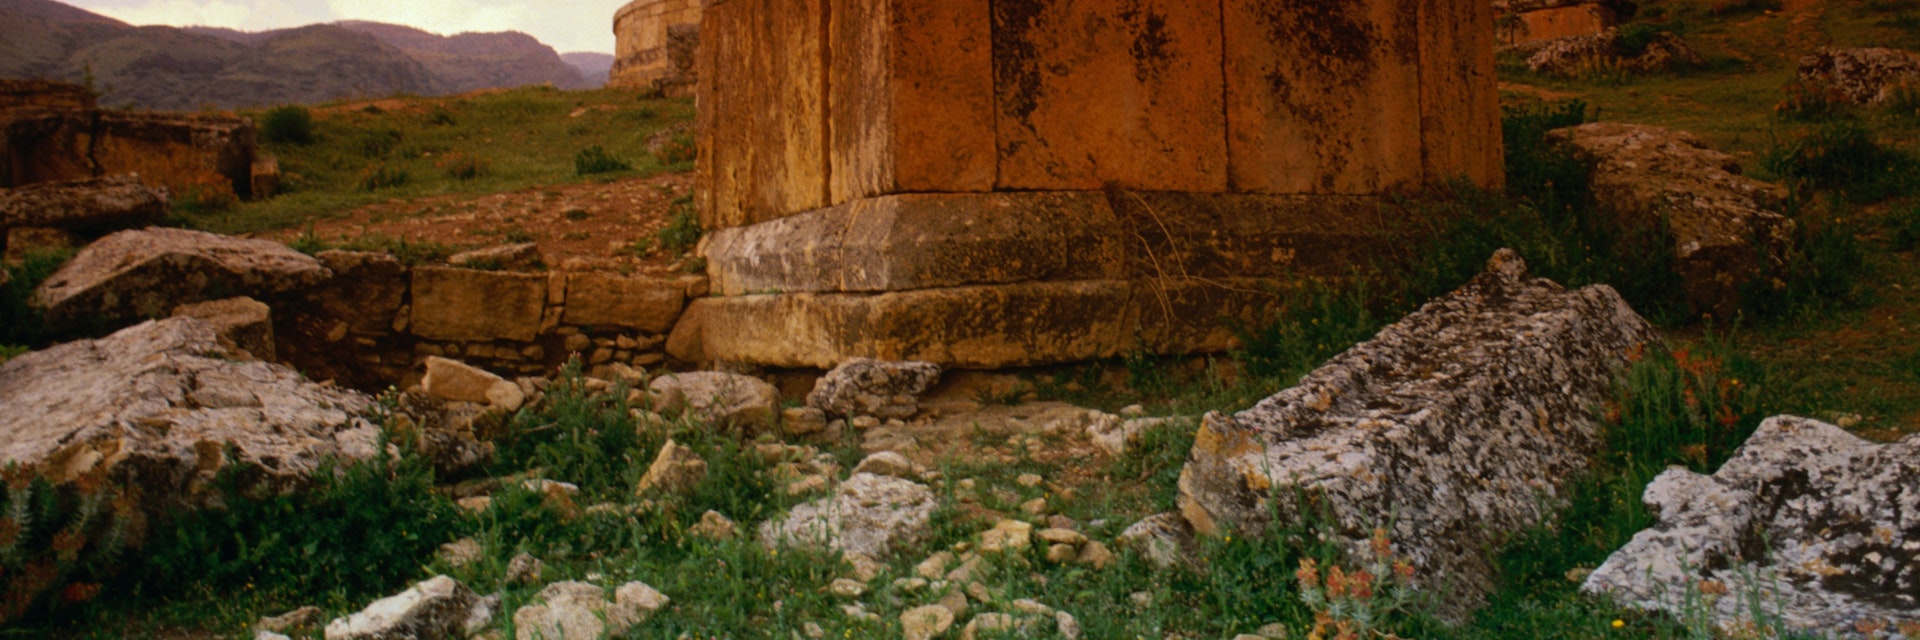 One of the striking tombs in the necropolis at Hierapolis.